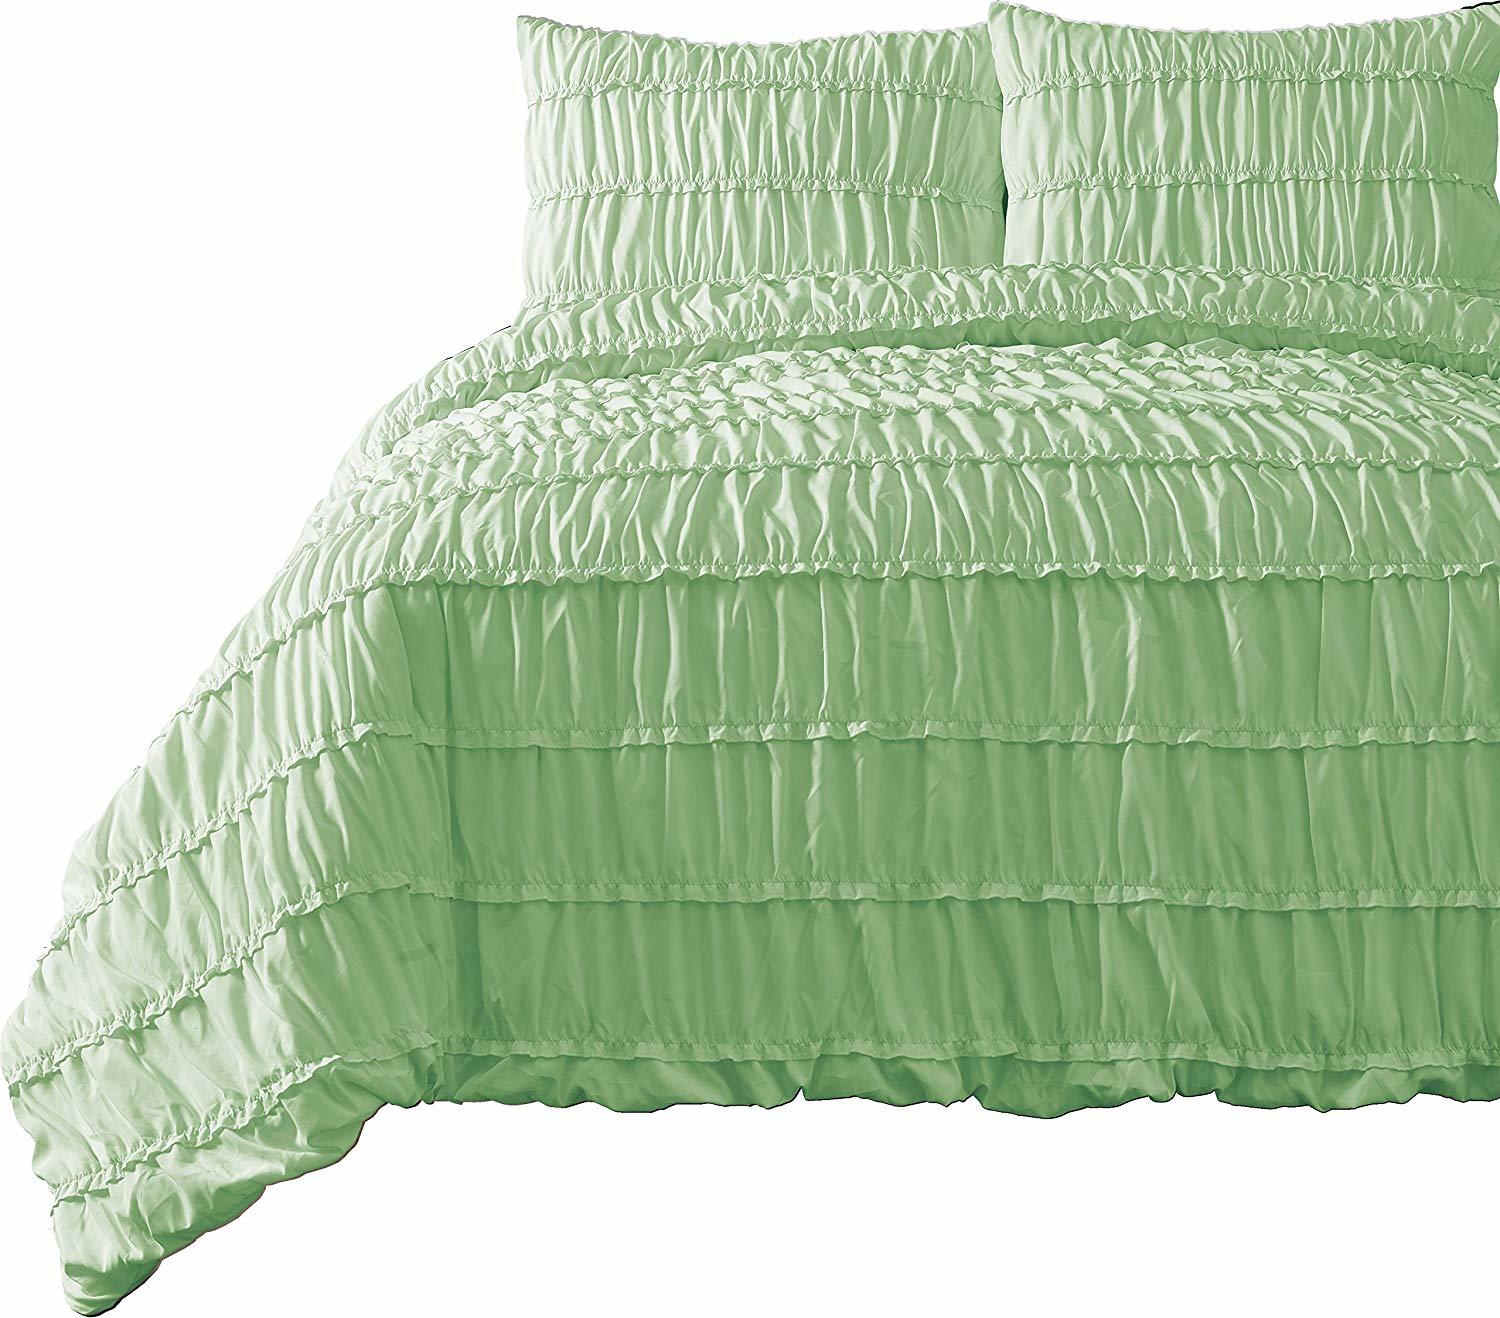 Ruched MINT 3pc Comforter Set Ruffled Pinch pleat Bed Cover Cozy Beddings - $34.88 - $48.88